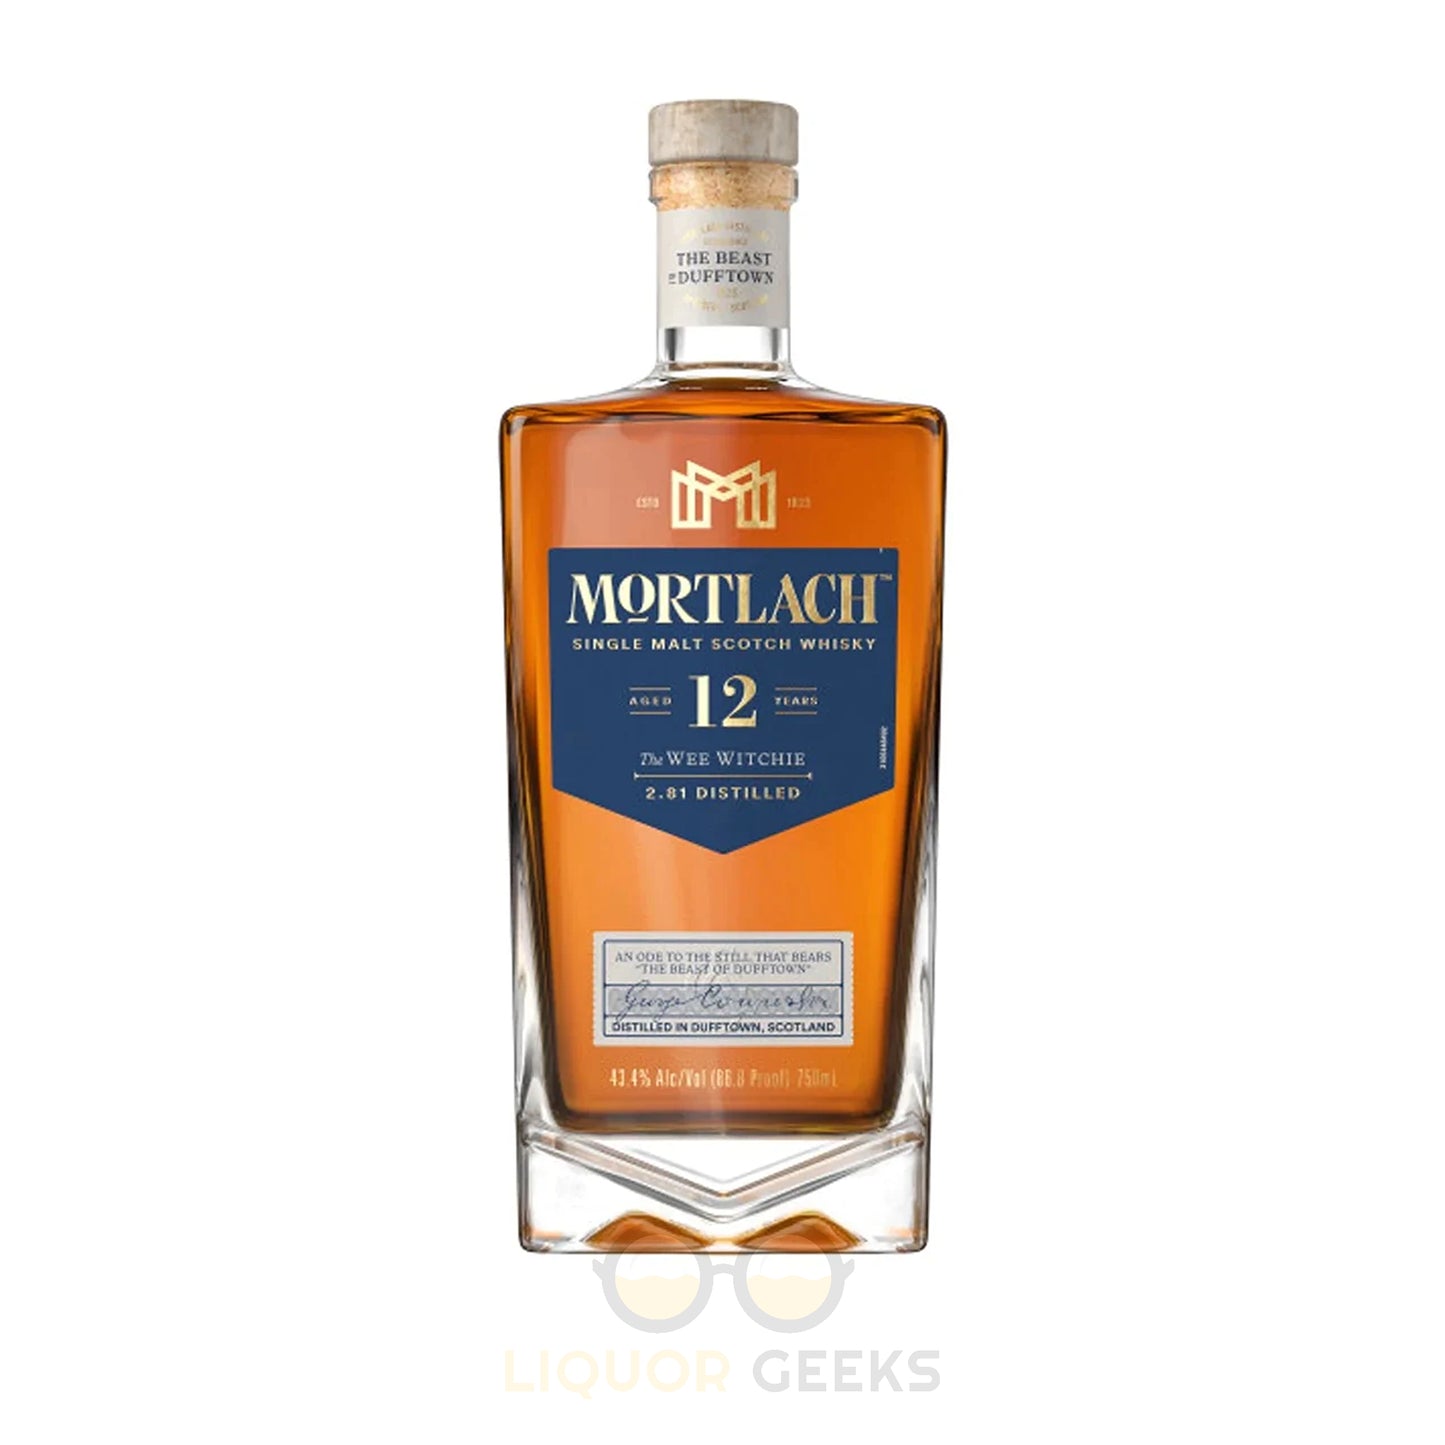 Mortlach Single Malt Scotch Whisky 12 Year The Wee Witchie Bottle - Liquor Geeks